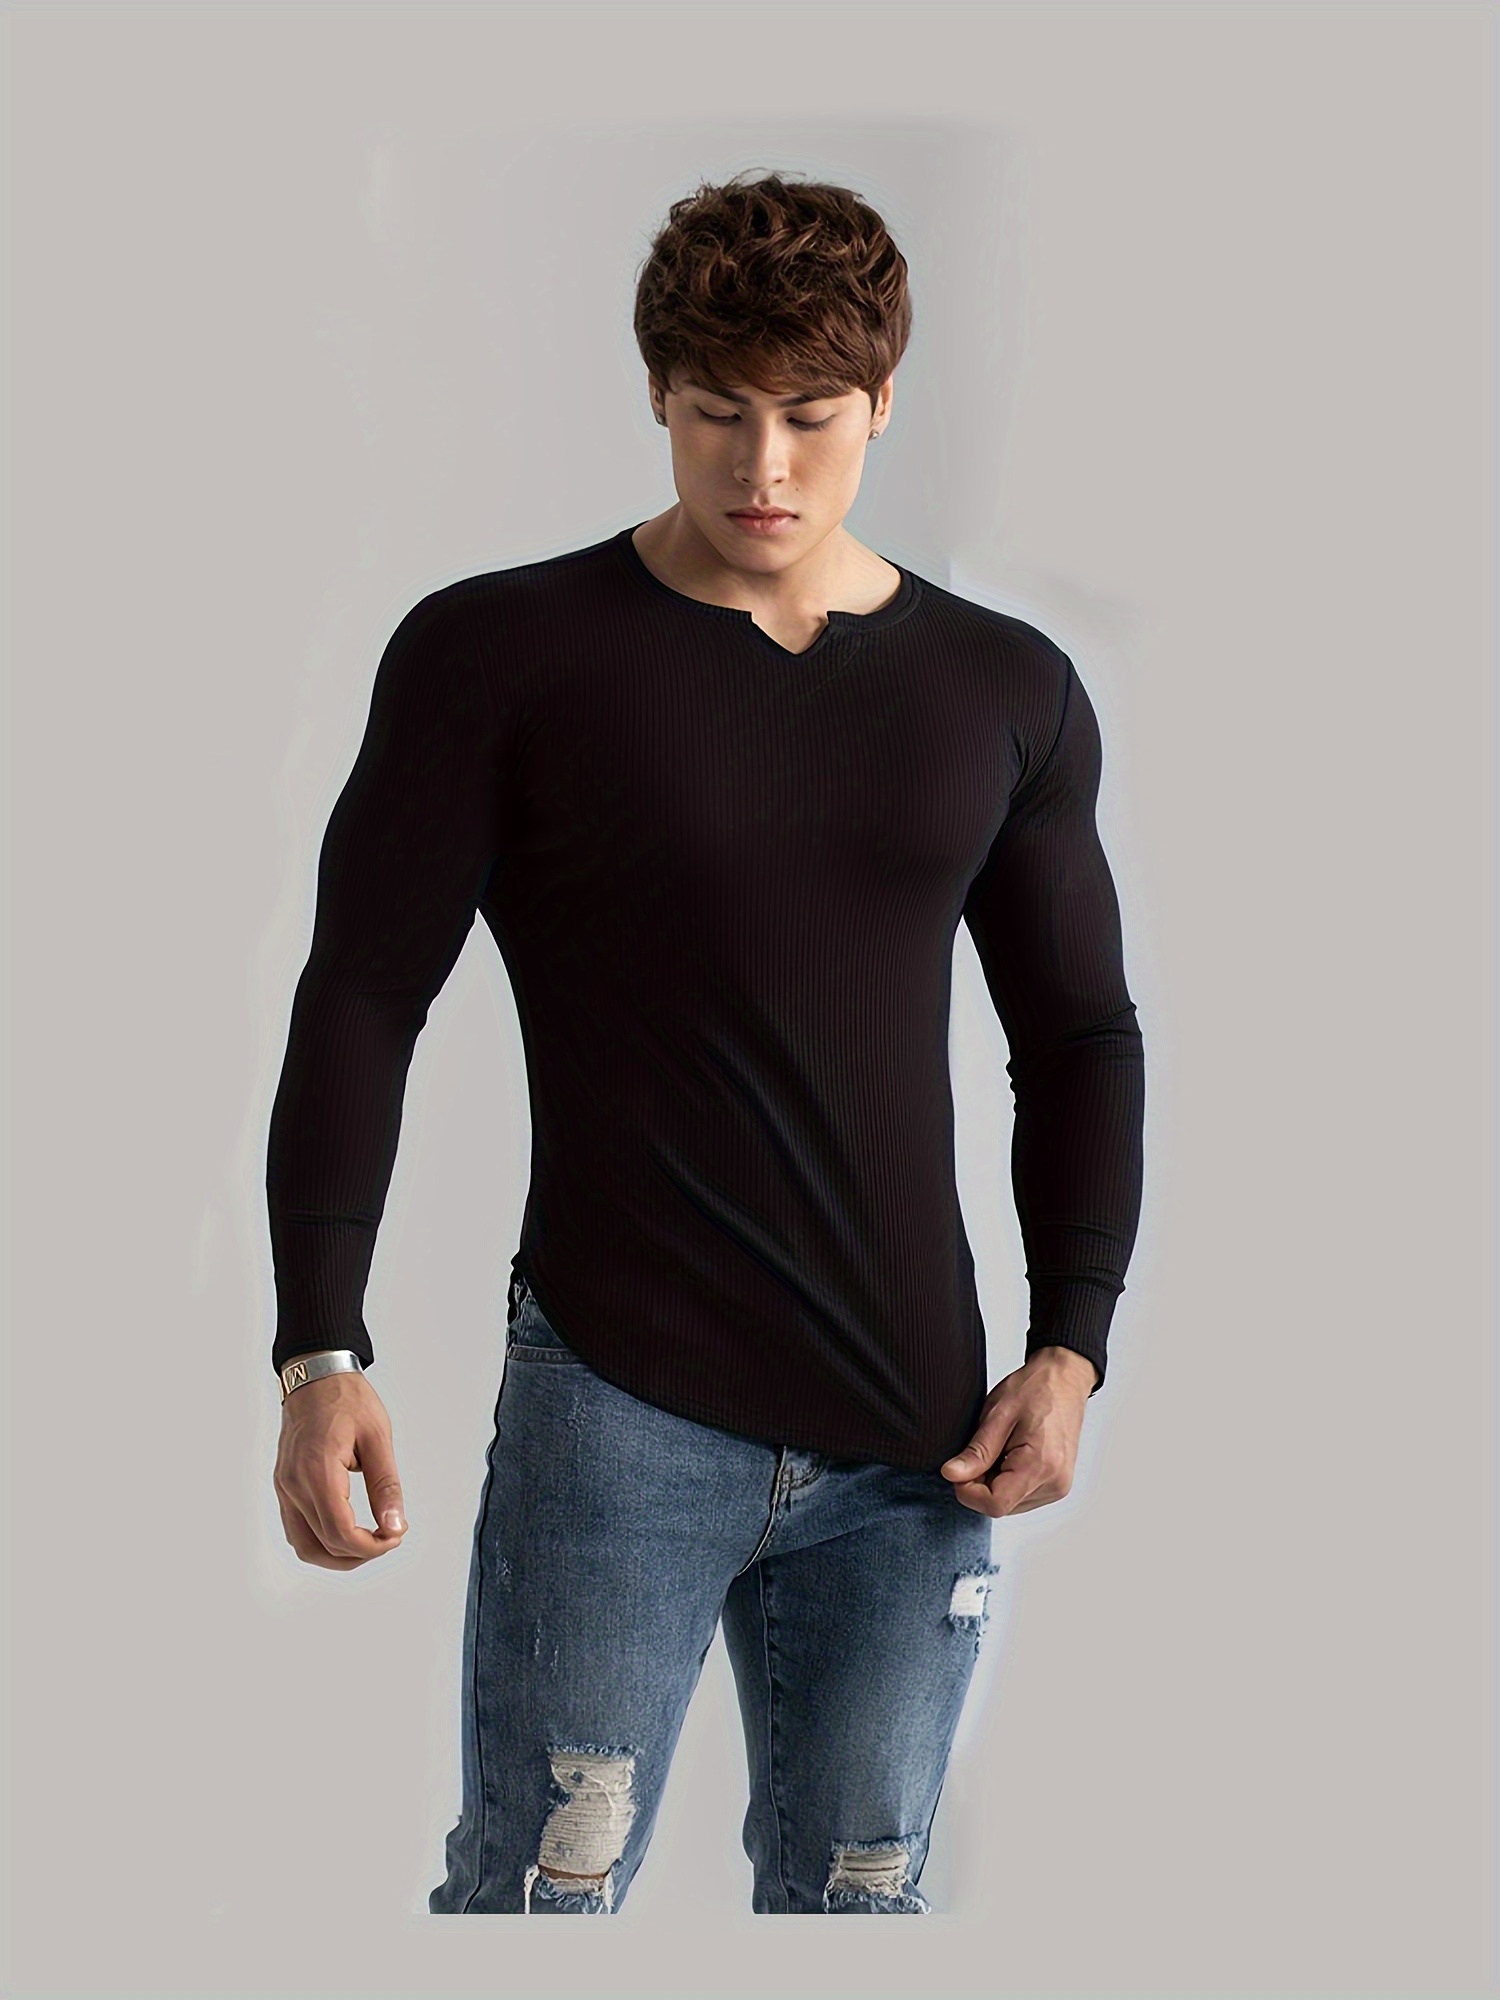  Men's T-Shirts Men Solid Round Neck Tee T-Shirts for